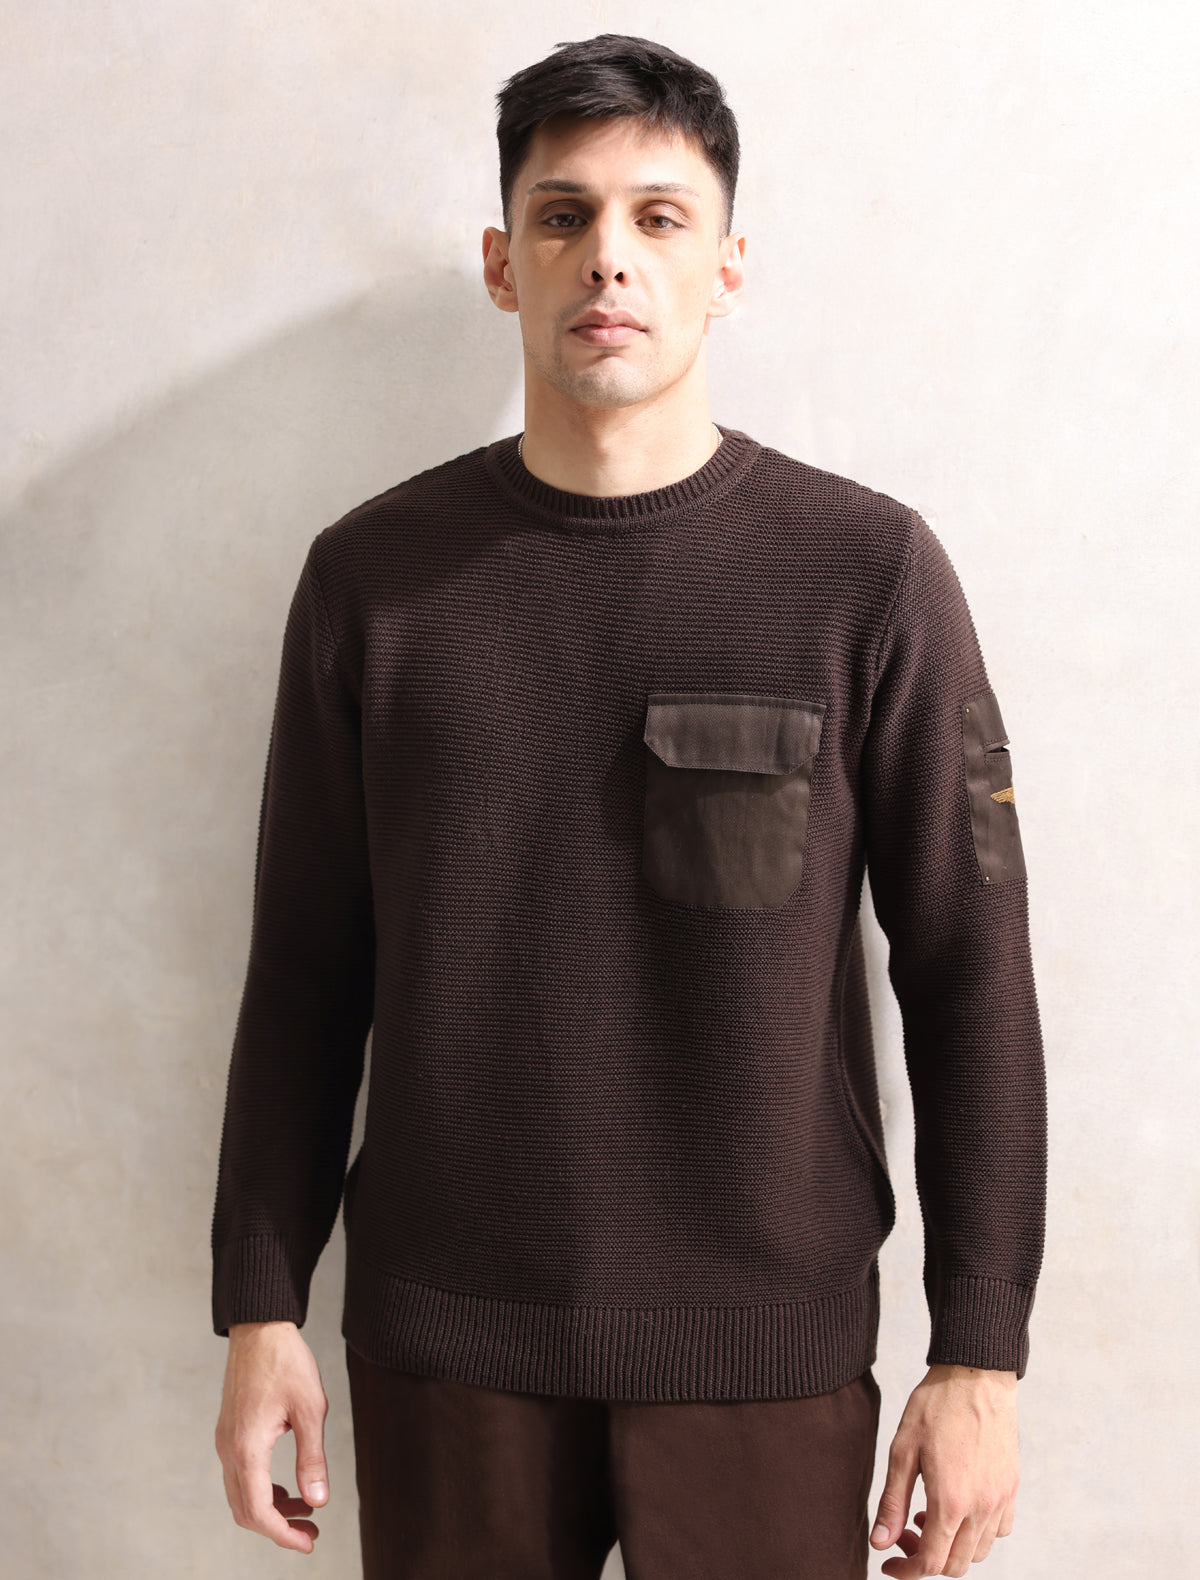 BROWN FULL SLEEVE ARMY STYLE SWEATER